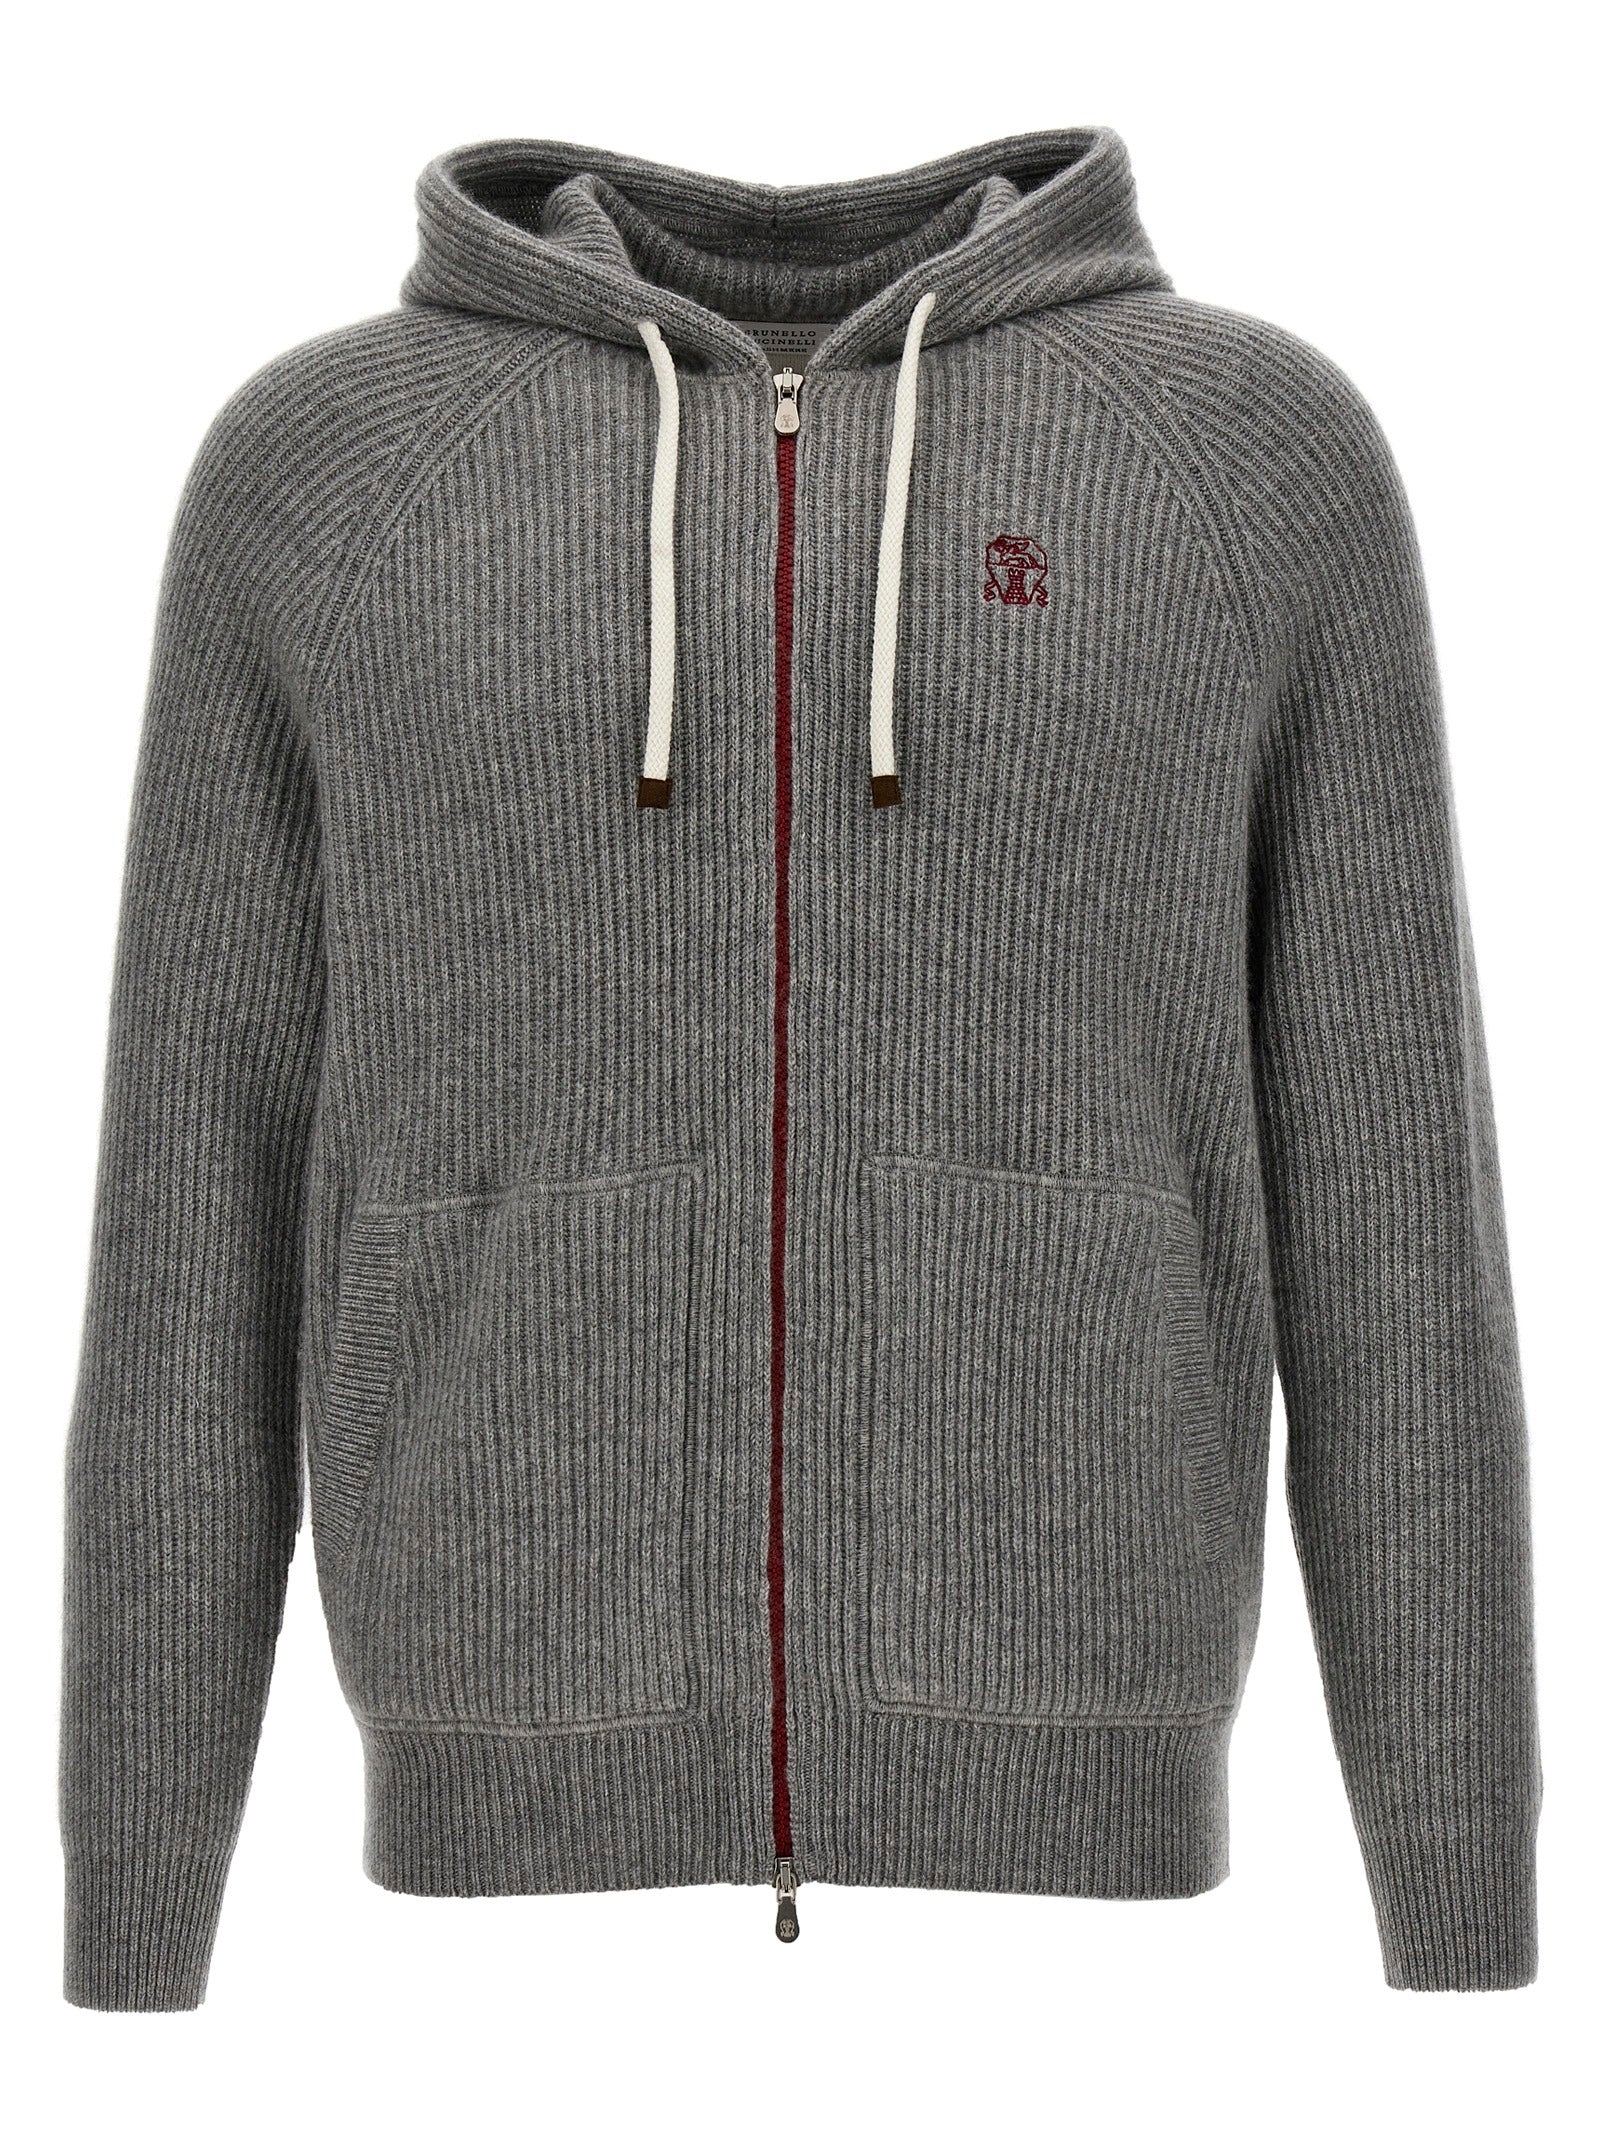 Shop Brunello Cucinelli Logo Embroidered Hooded Cardigan Sweater, Cardigans Gray